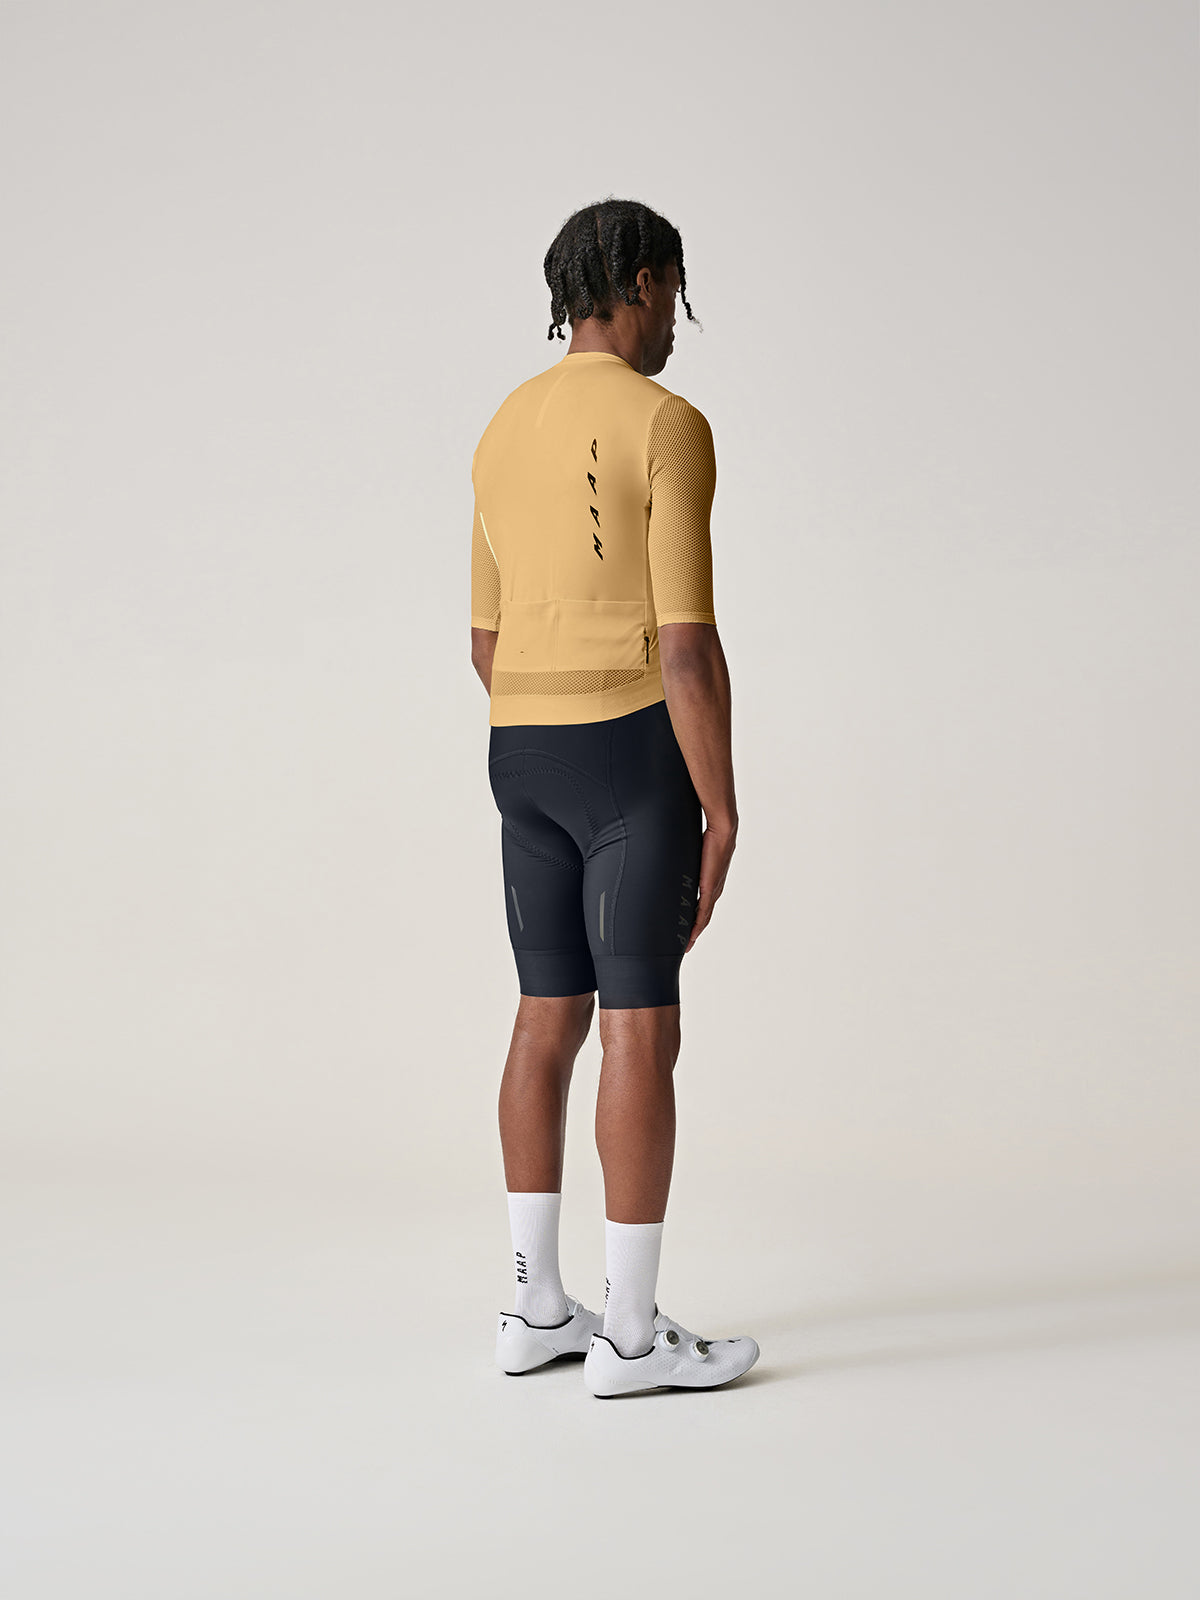 Evade Pro Base Jersey 2.0 - Fawn